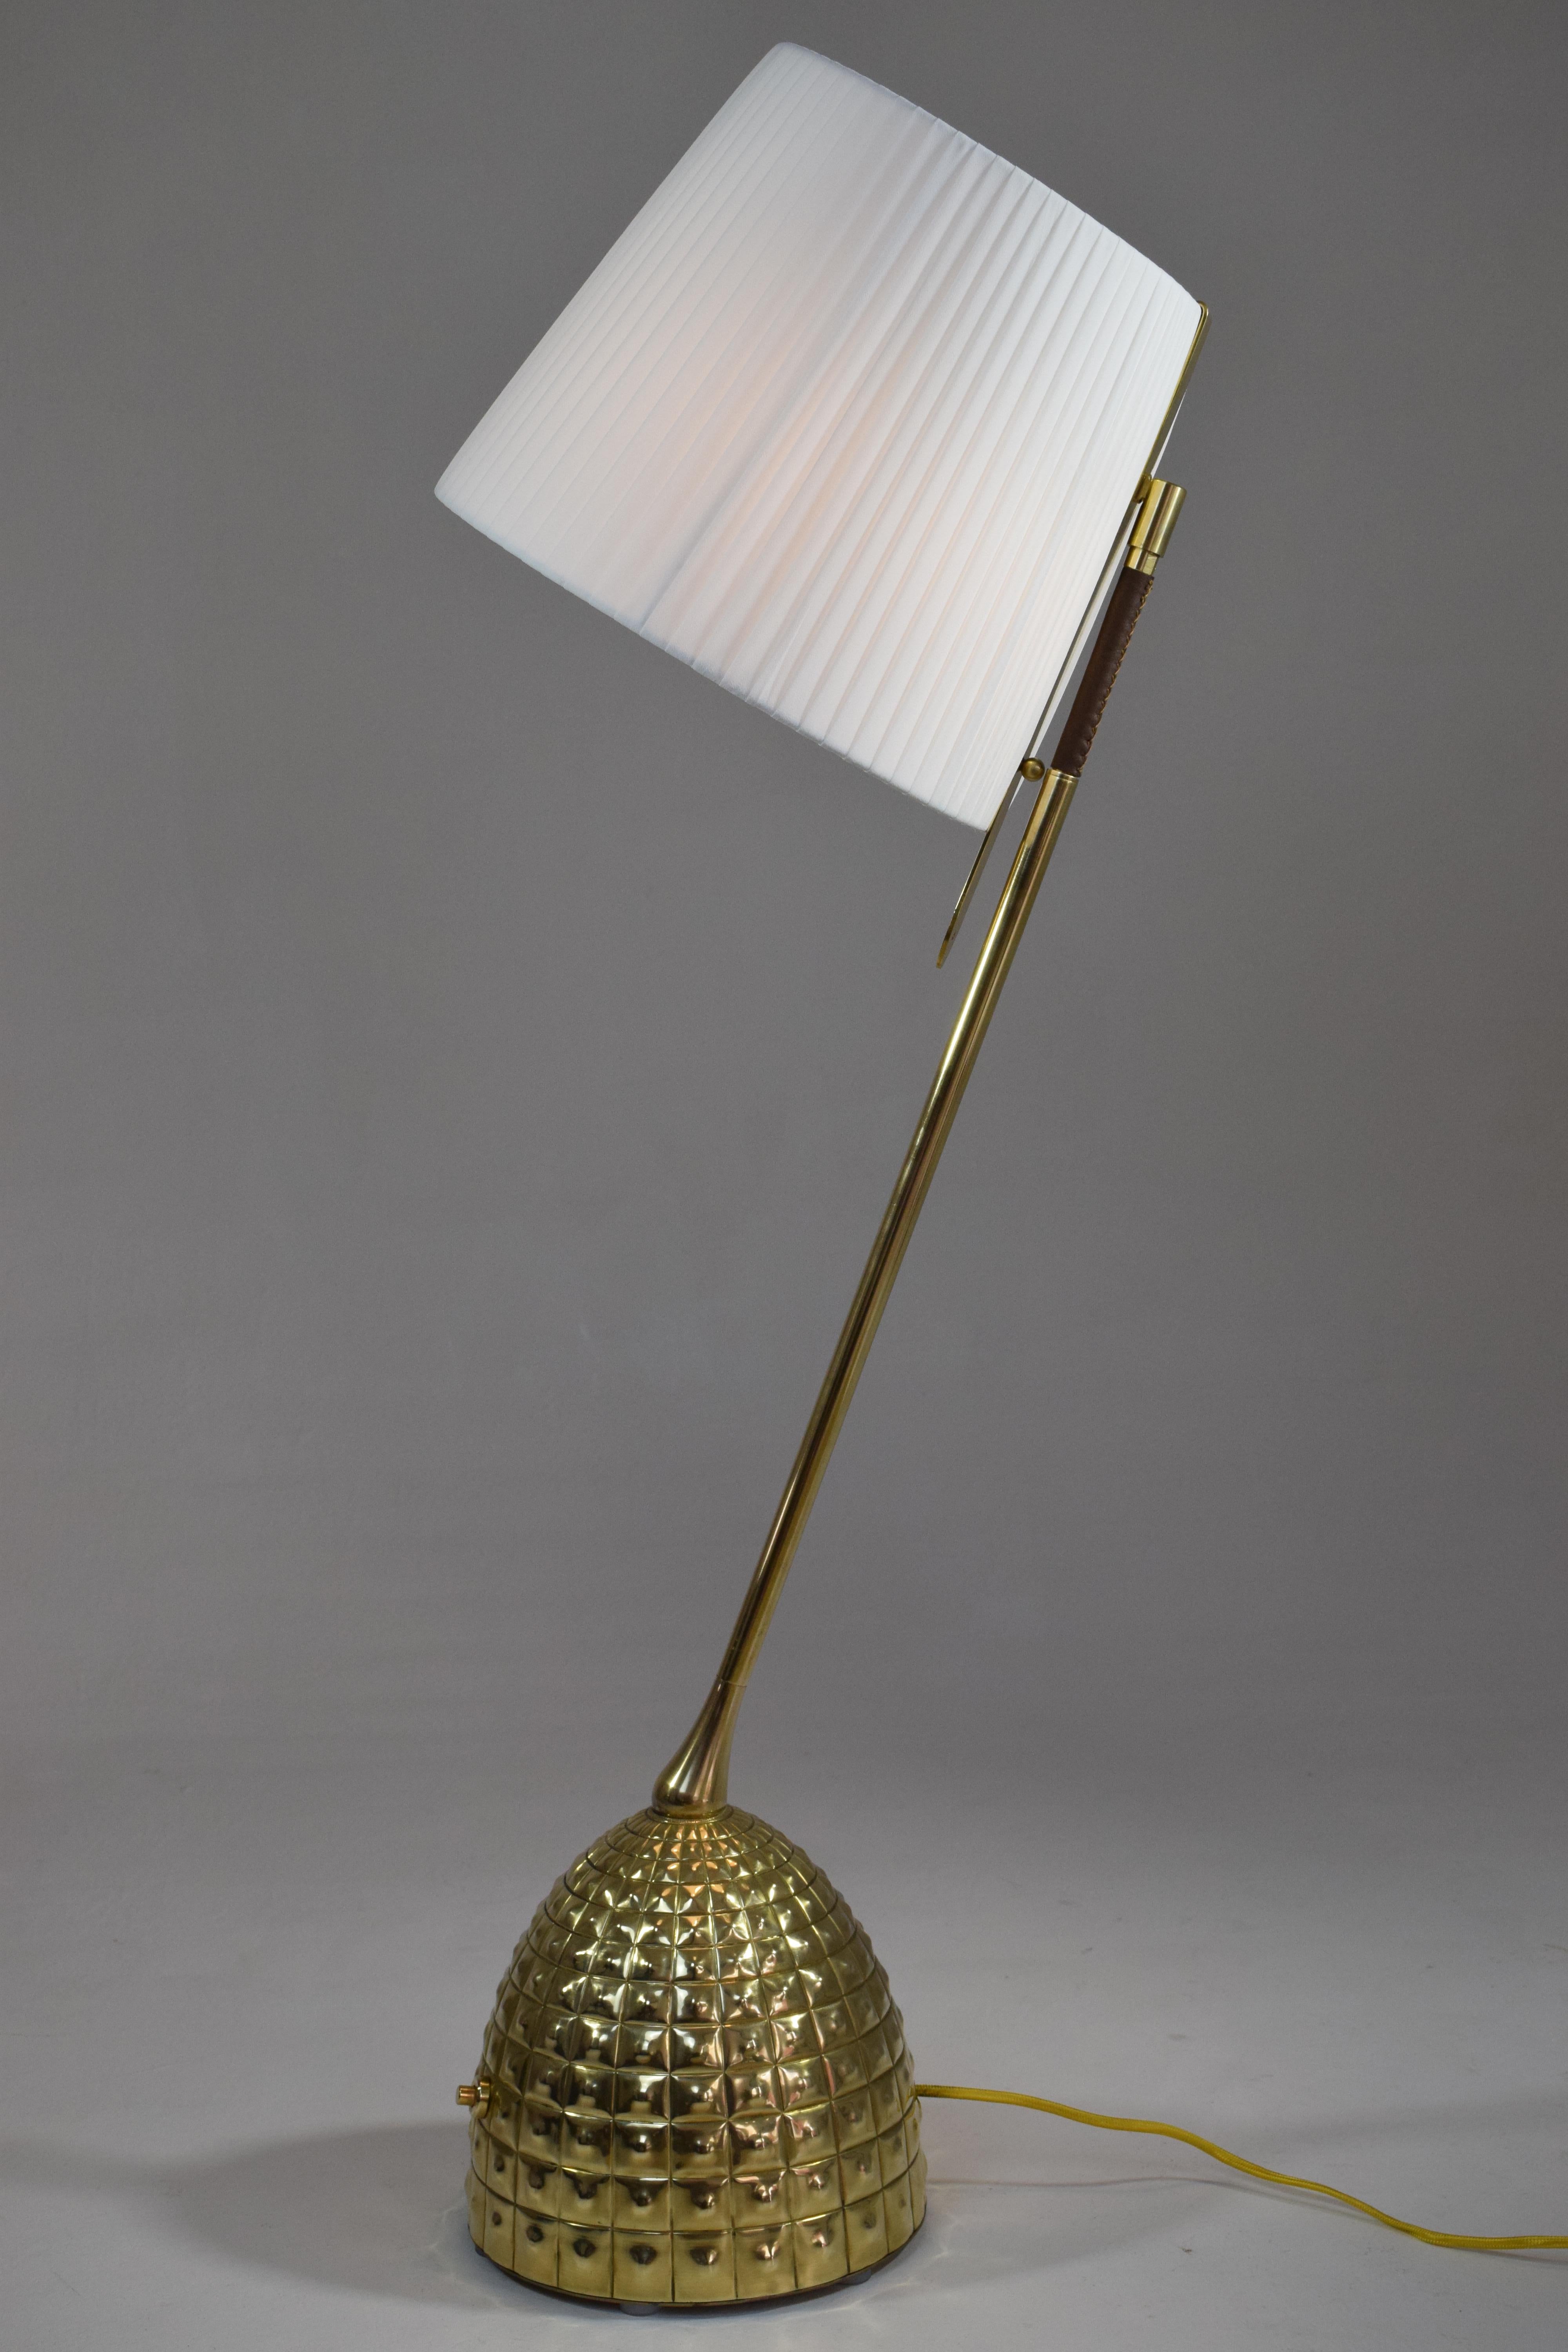 Contemporary handcrafted articulating table lamp of considerable size in solid gold polished brass and a hand sewn sheathed leather detail, intricately hand embellished base and designed with our signature pear-shaped joint. The shade is built with